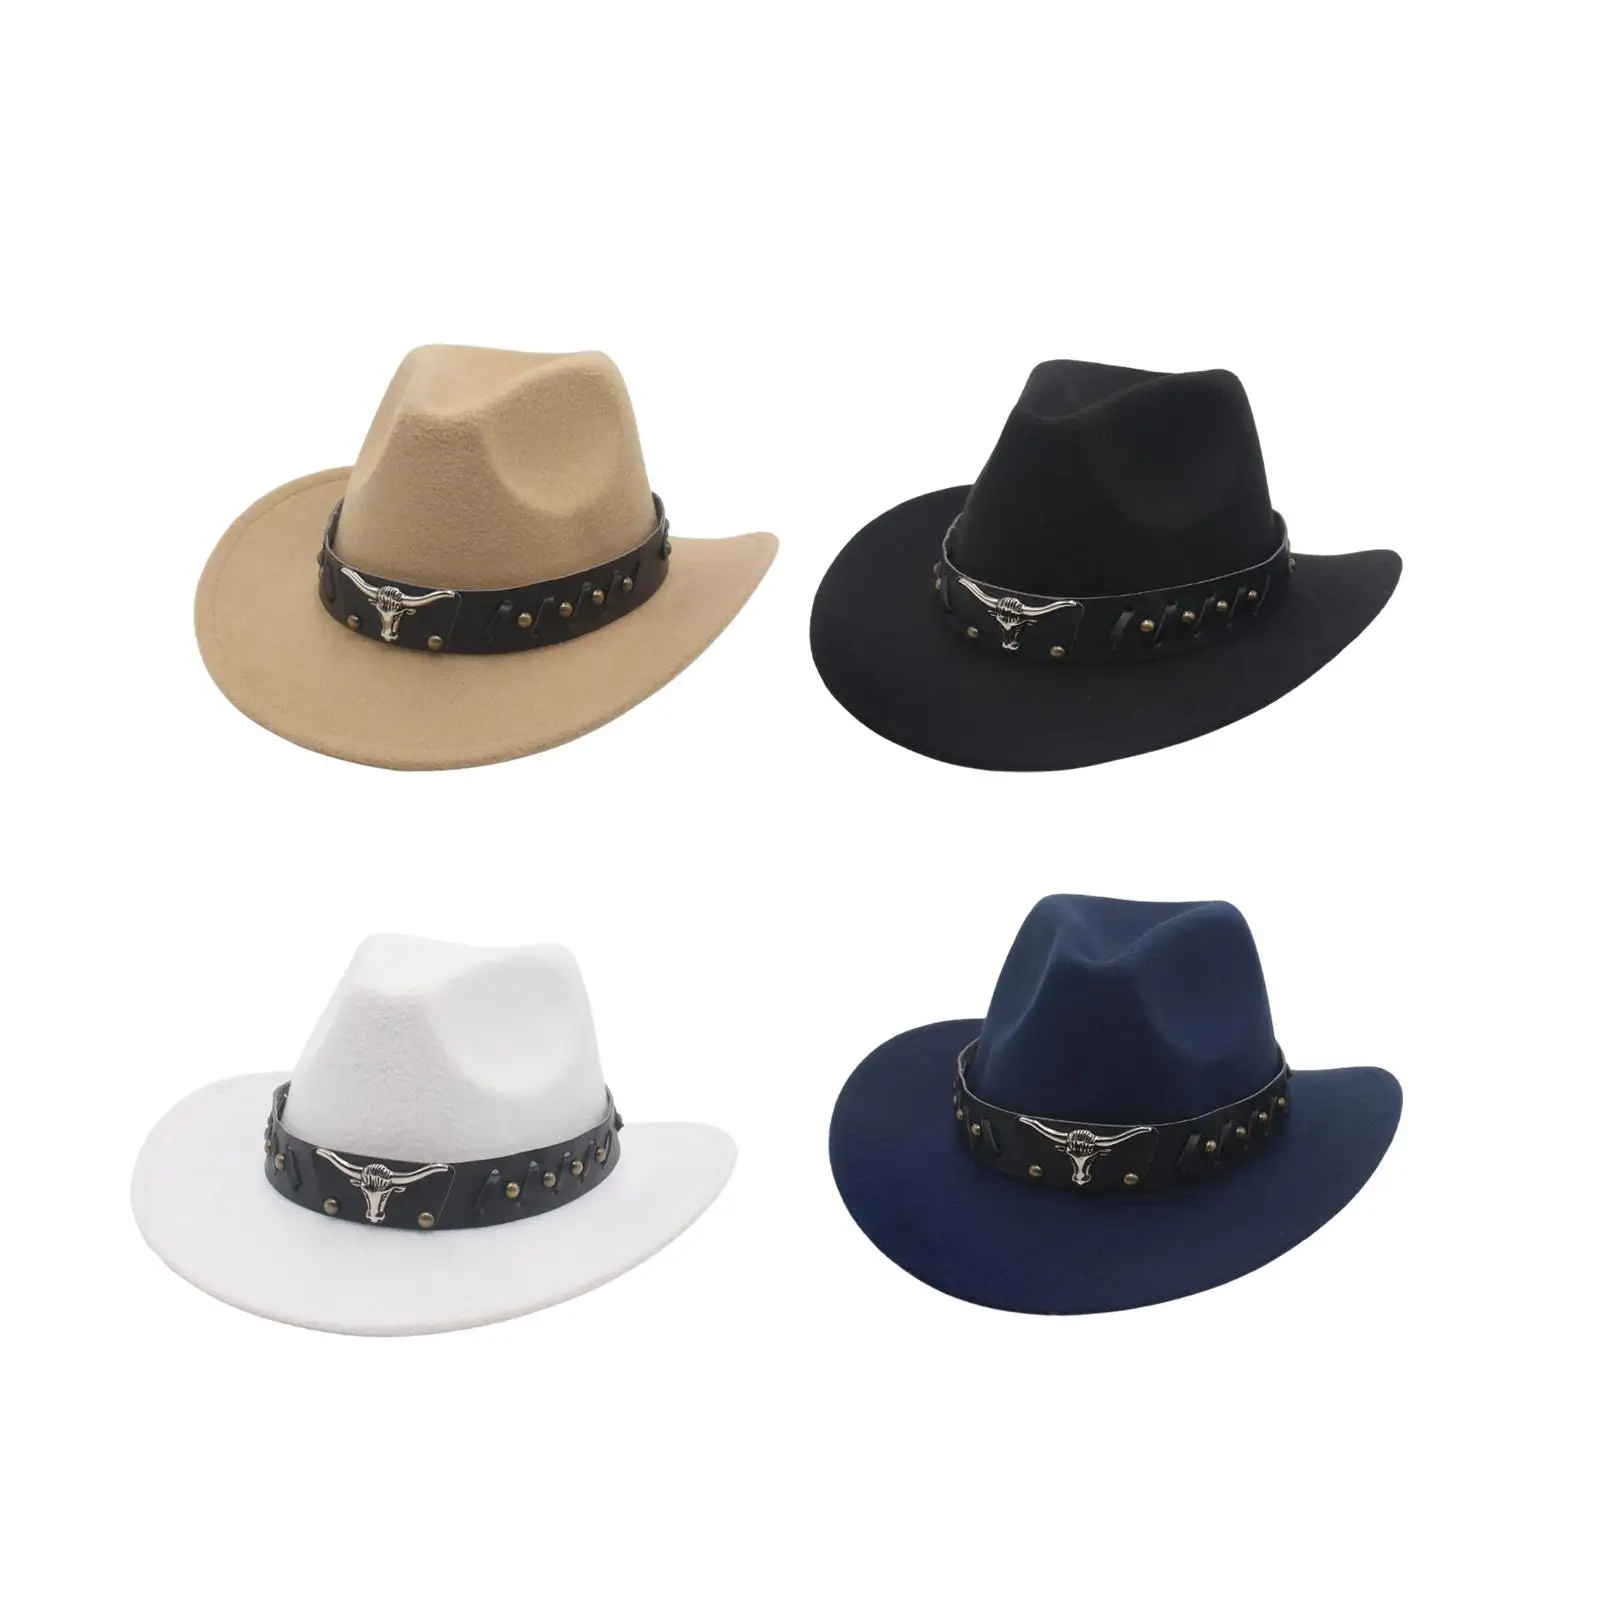 Cowboy Hat Props Adults Versatile Summer Classic Comfortable Big Brim Sunhat for Holiday Costume Autumn Carnival Outdoor Travel